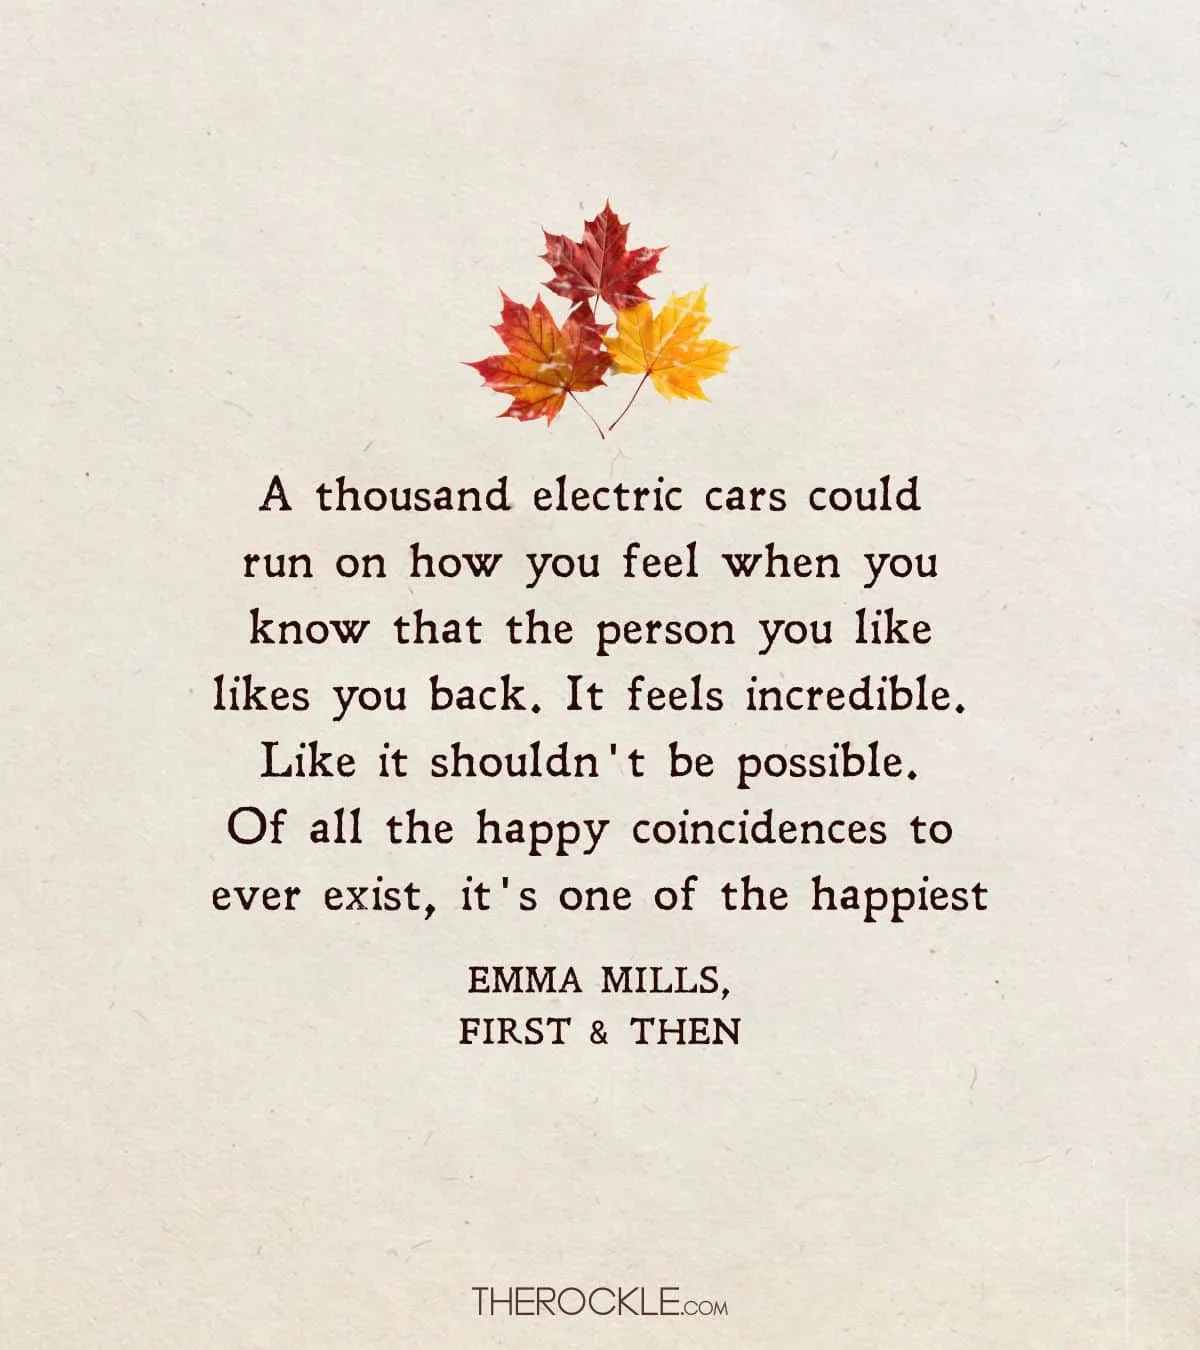 Quote from First & Then by Emma Mills